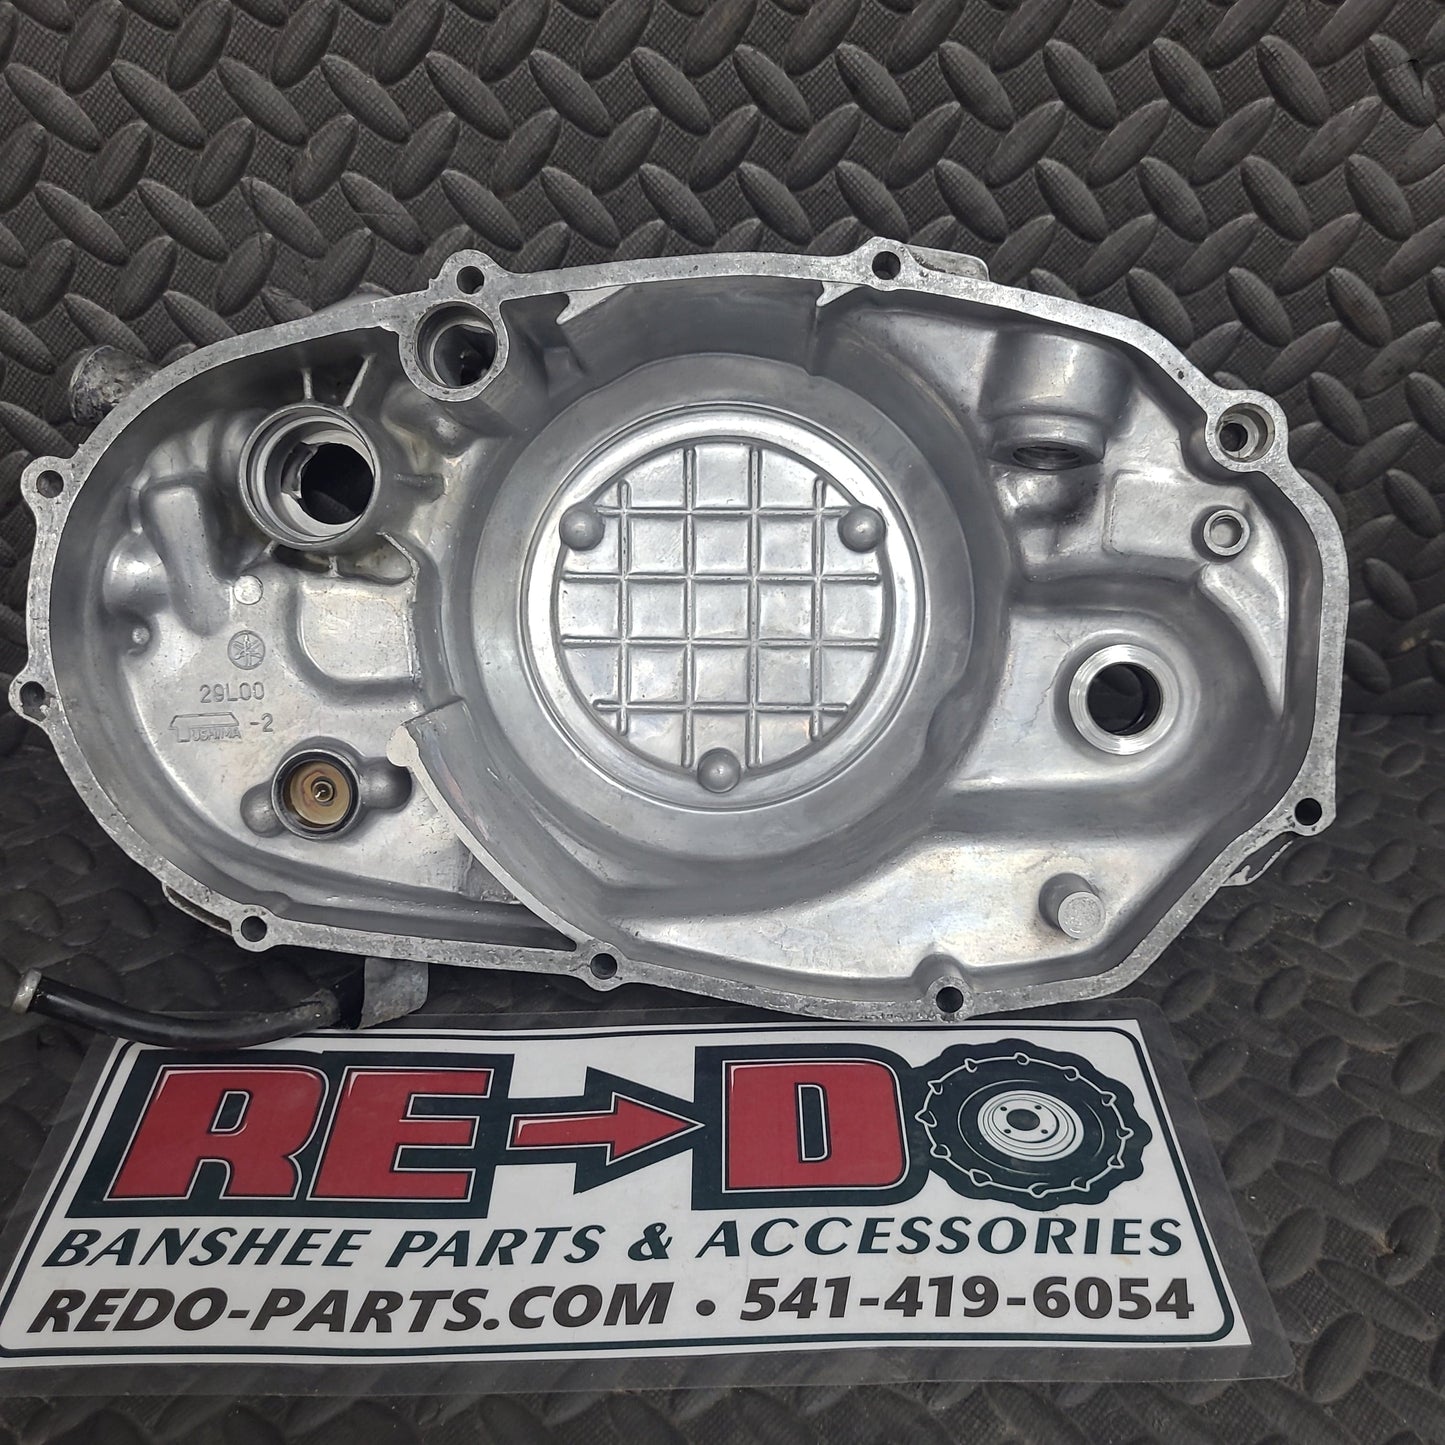 Factory OEM Clutch Cover w/ Billet Inset *USED*